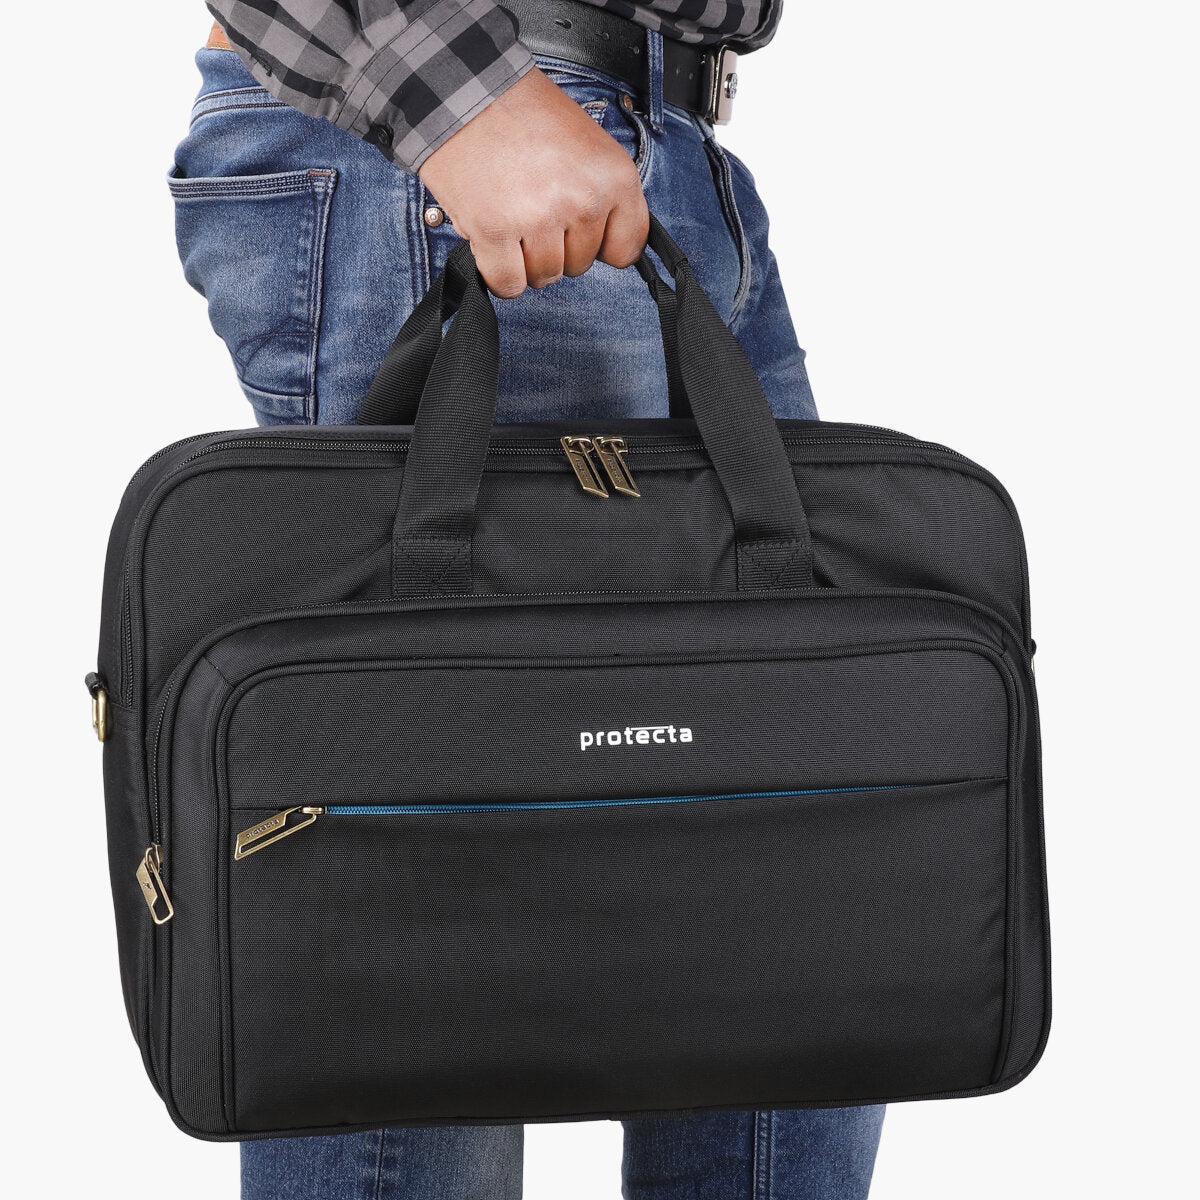 Black-Blue, Protecta Staunch Ally Travel & Offfice Laptop Bag-7